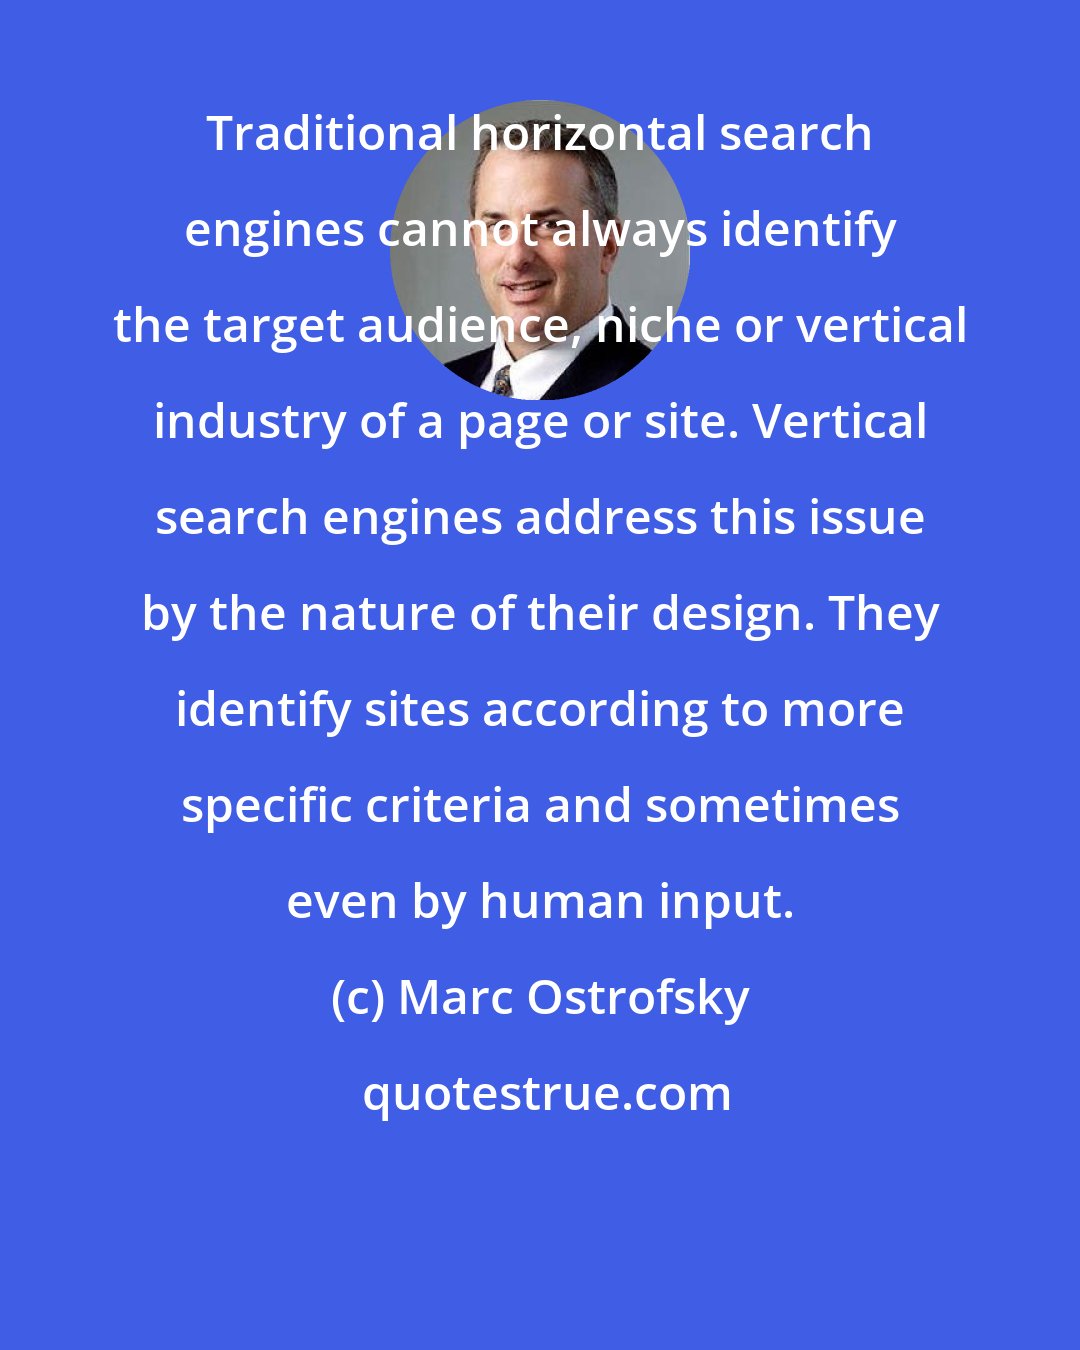 Marc Ostrofsky: Traditional horizontal search engines cannot always identify the target audience, niche or vertical industry of a page or site. Vertical search engines address this issue by the nature of their design. They identify sites according to more specific criteria and sometimes even by human input.